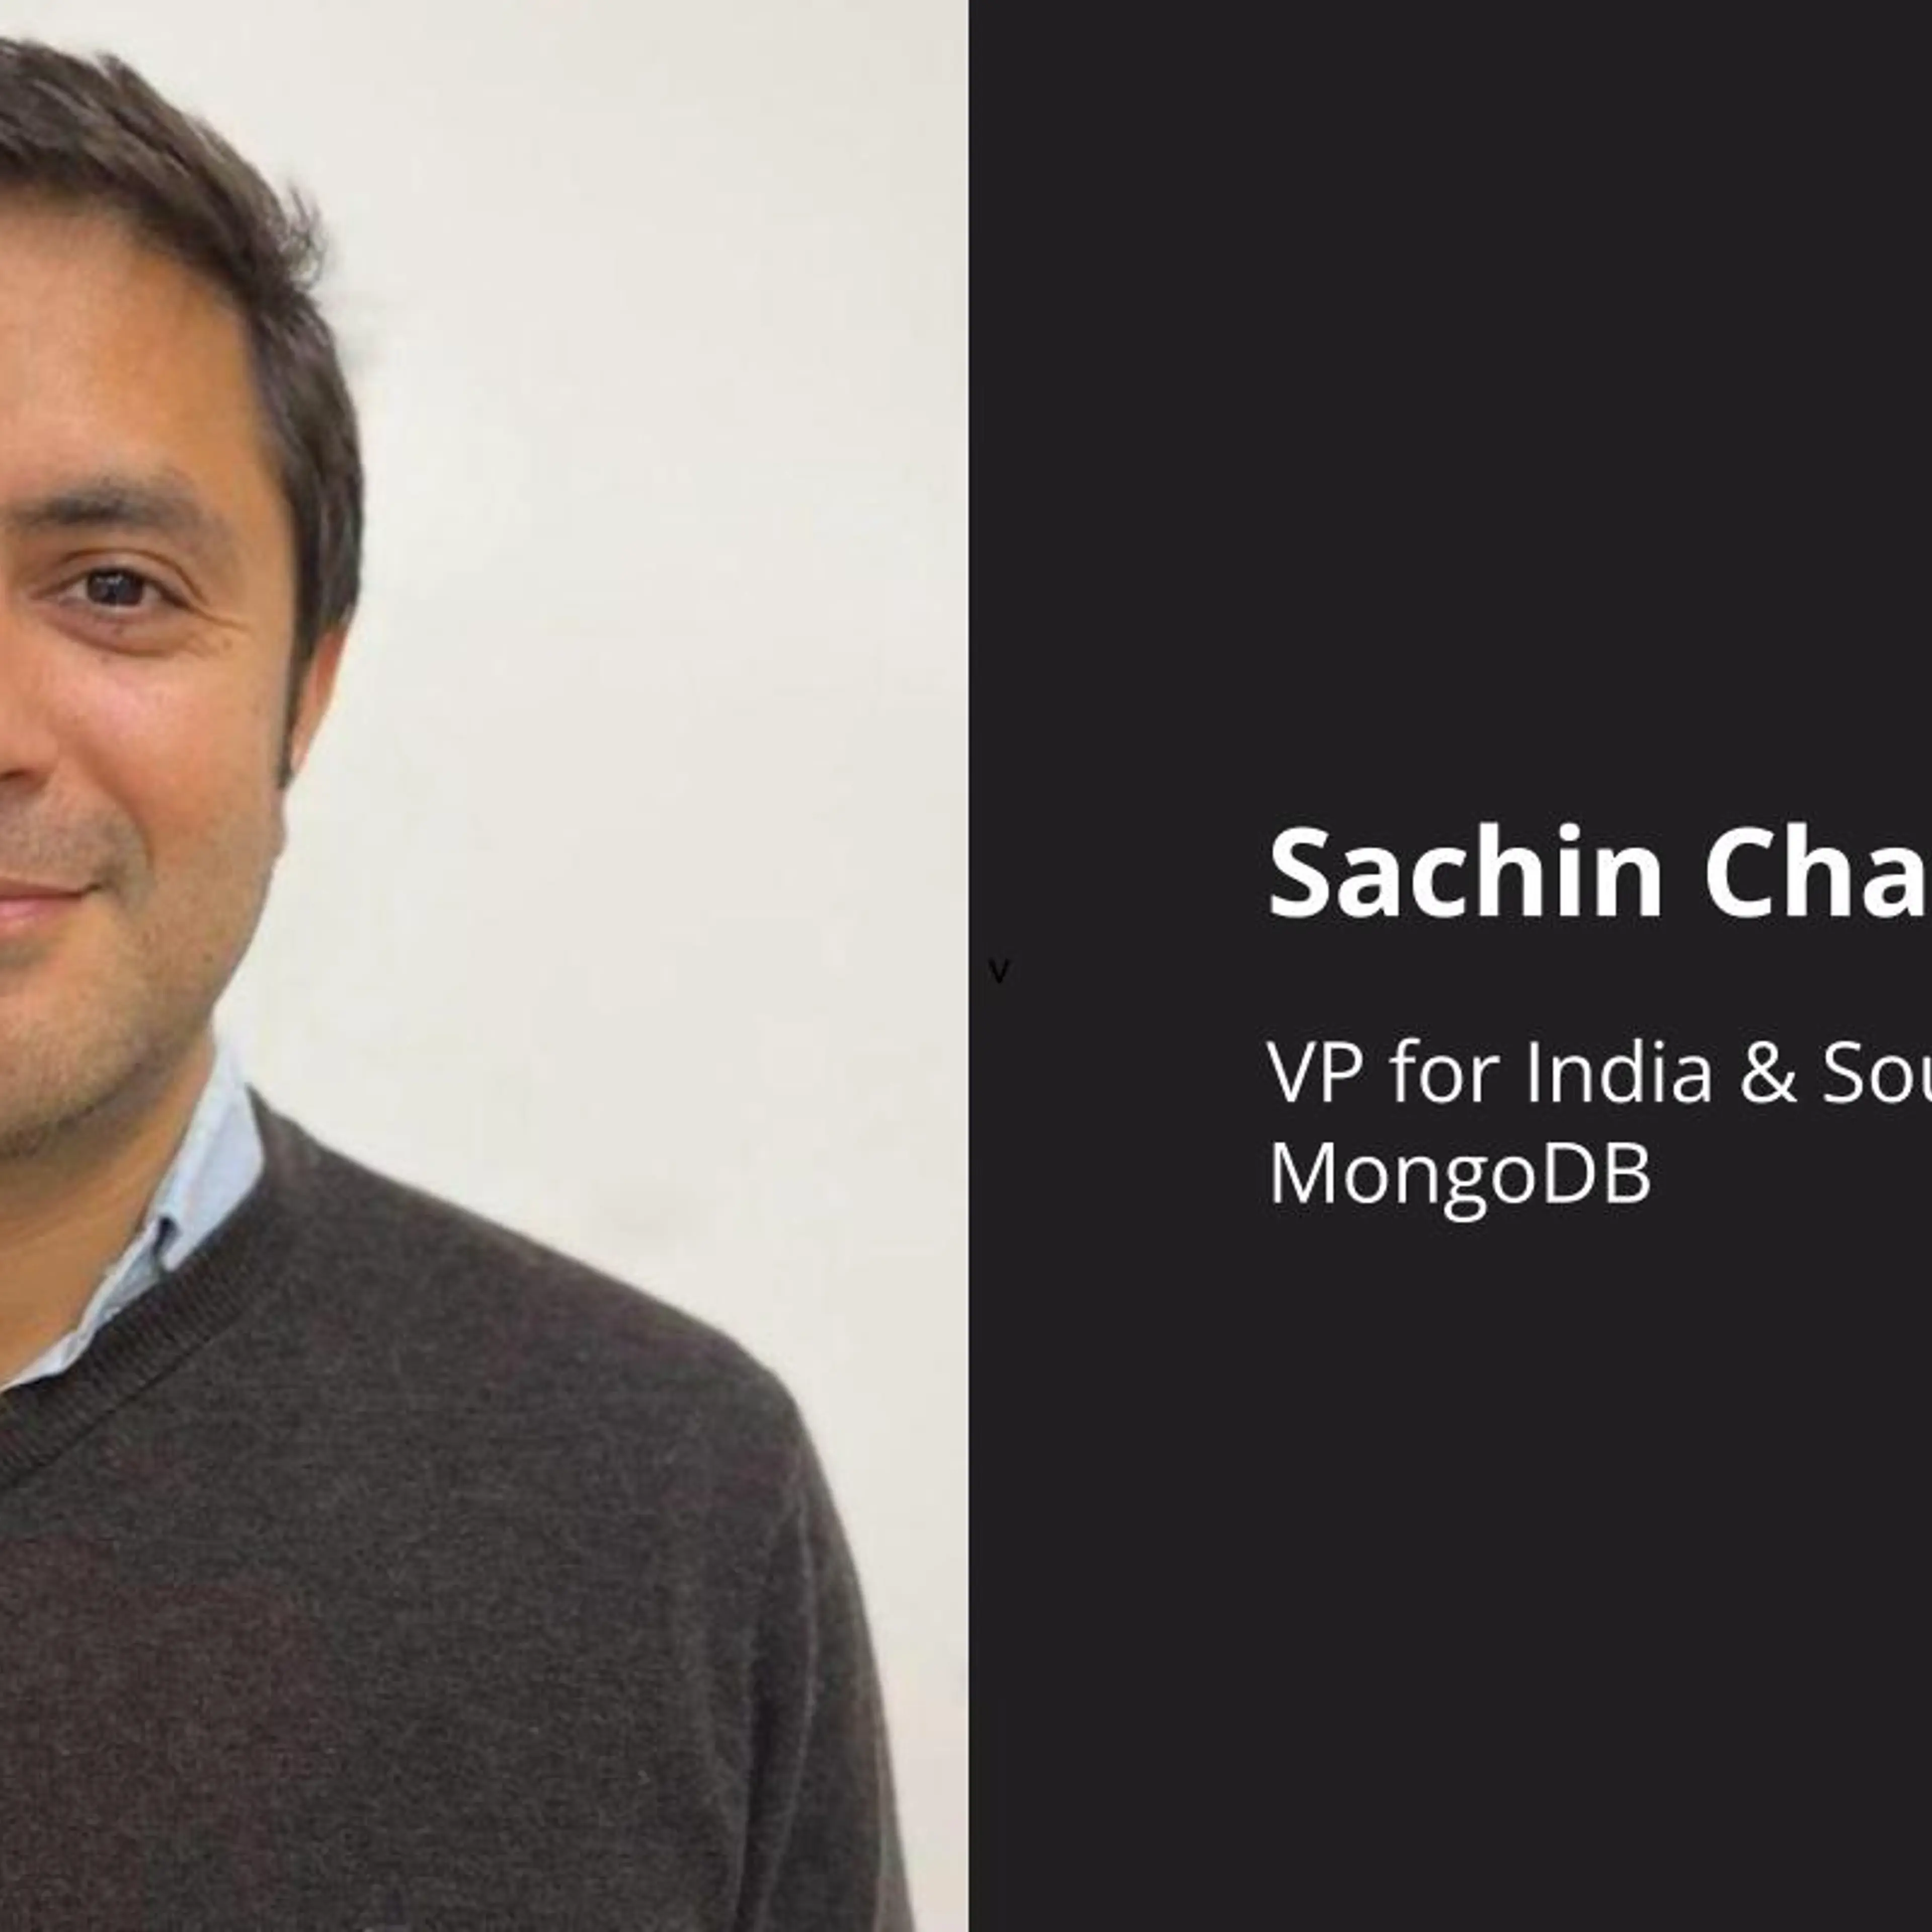 We are just getting started: MongoDB’s Sachin Chawla on building solutions for India
